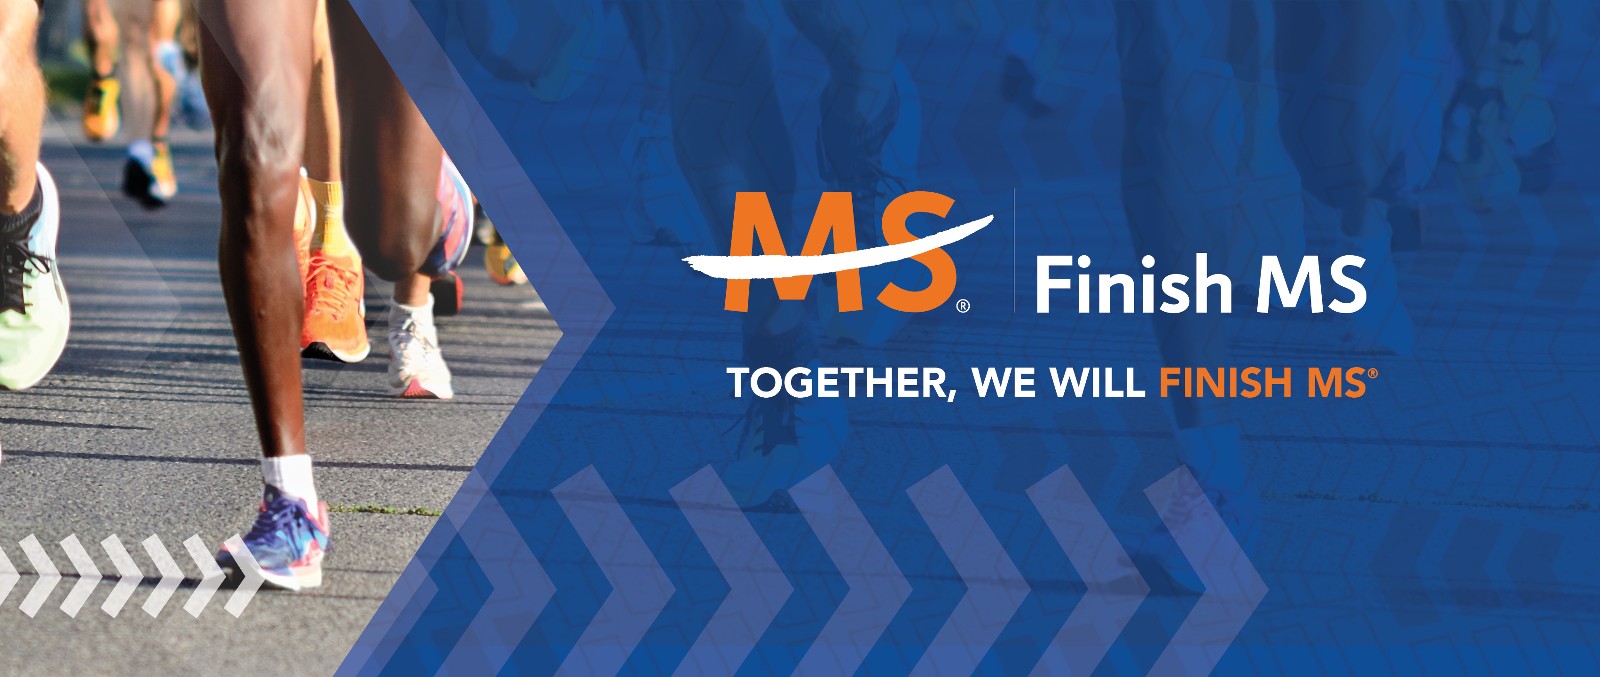 Finish MS - Together, We Will Finish MS, blue background